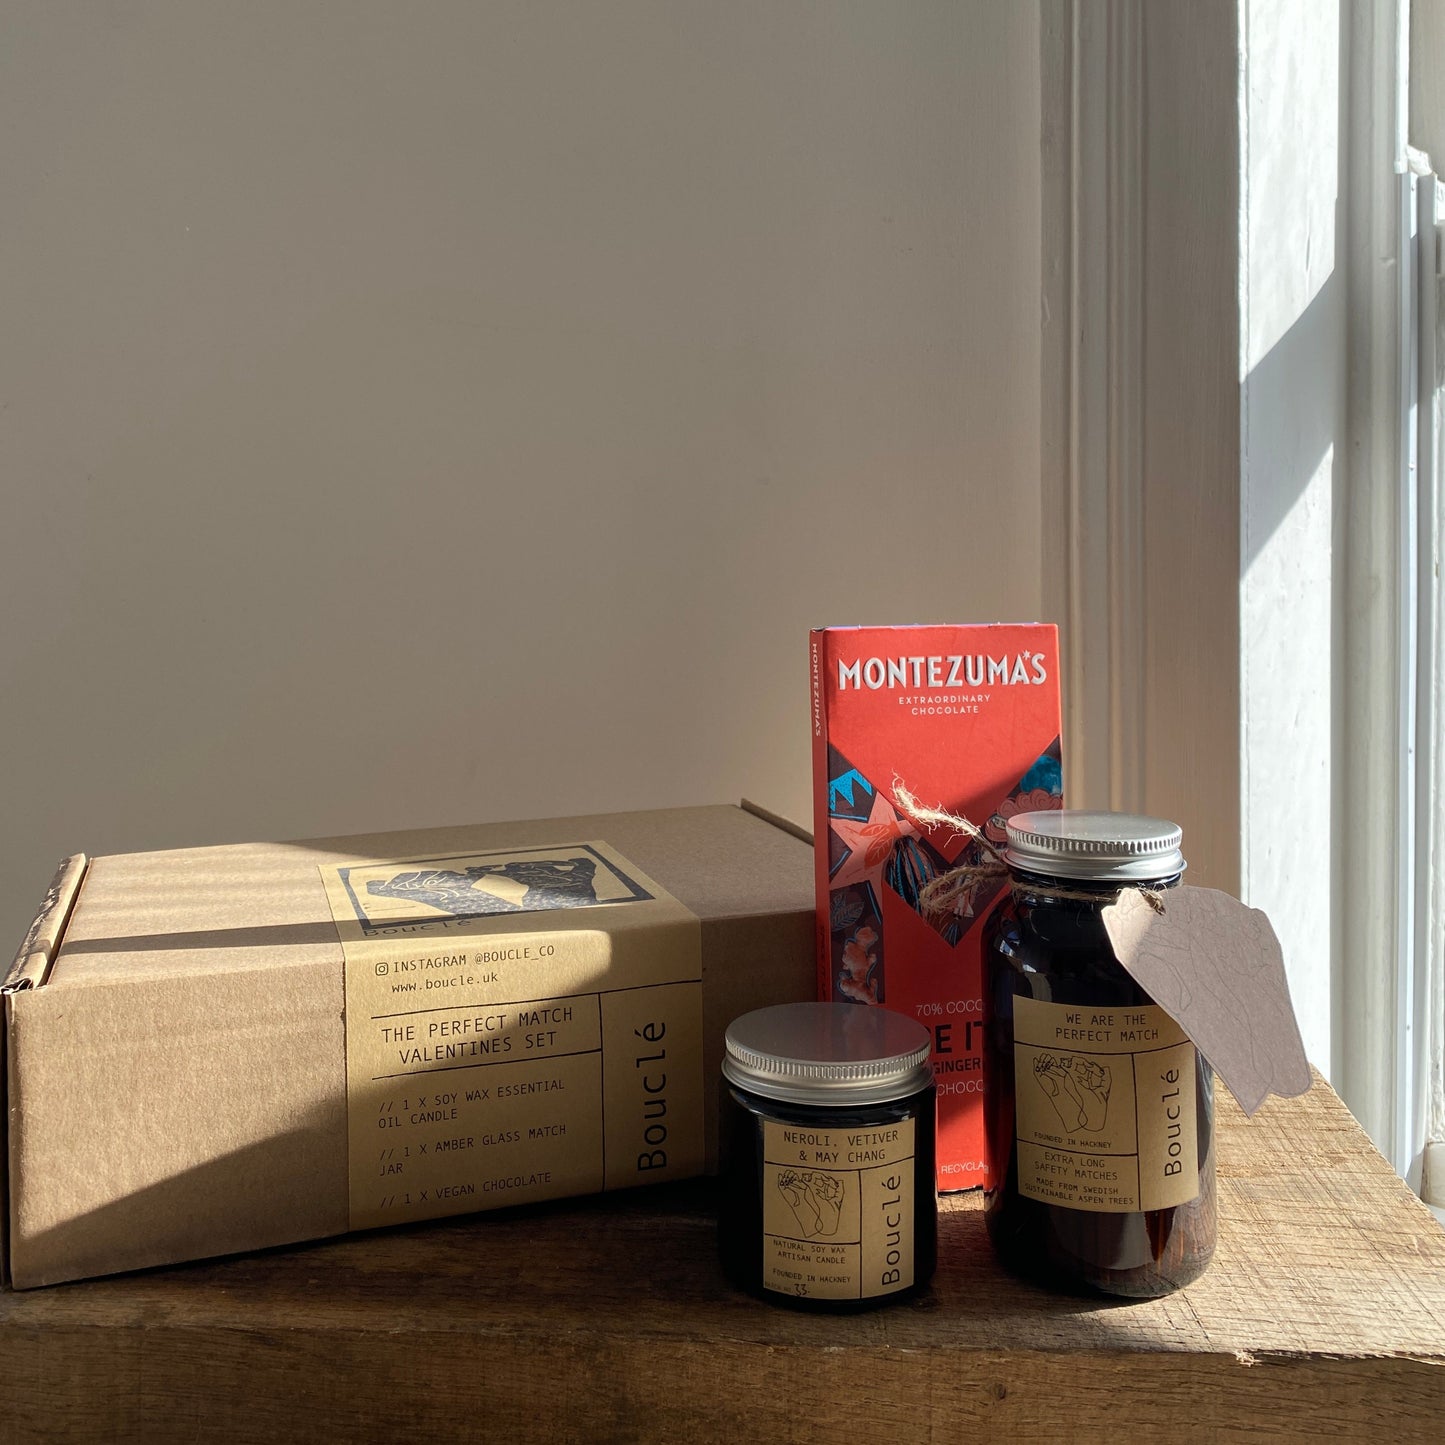 The vegan natural flower candle, jar of extra long safety matches & chocolate will come presented in a recycled gift box sealed with a Bouclé London label.